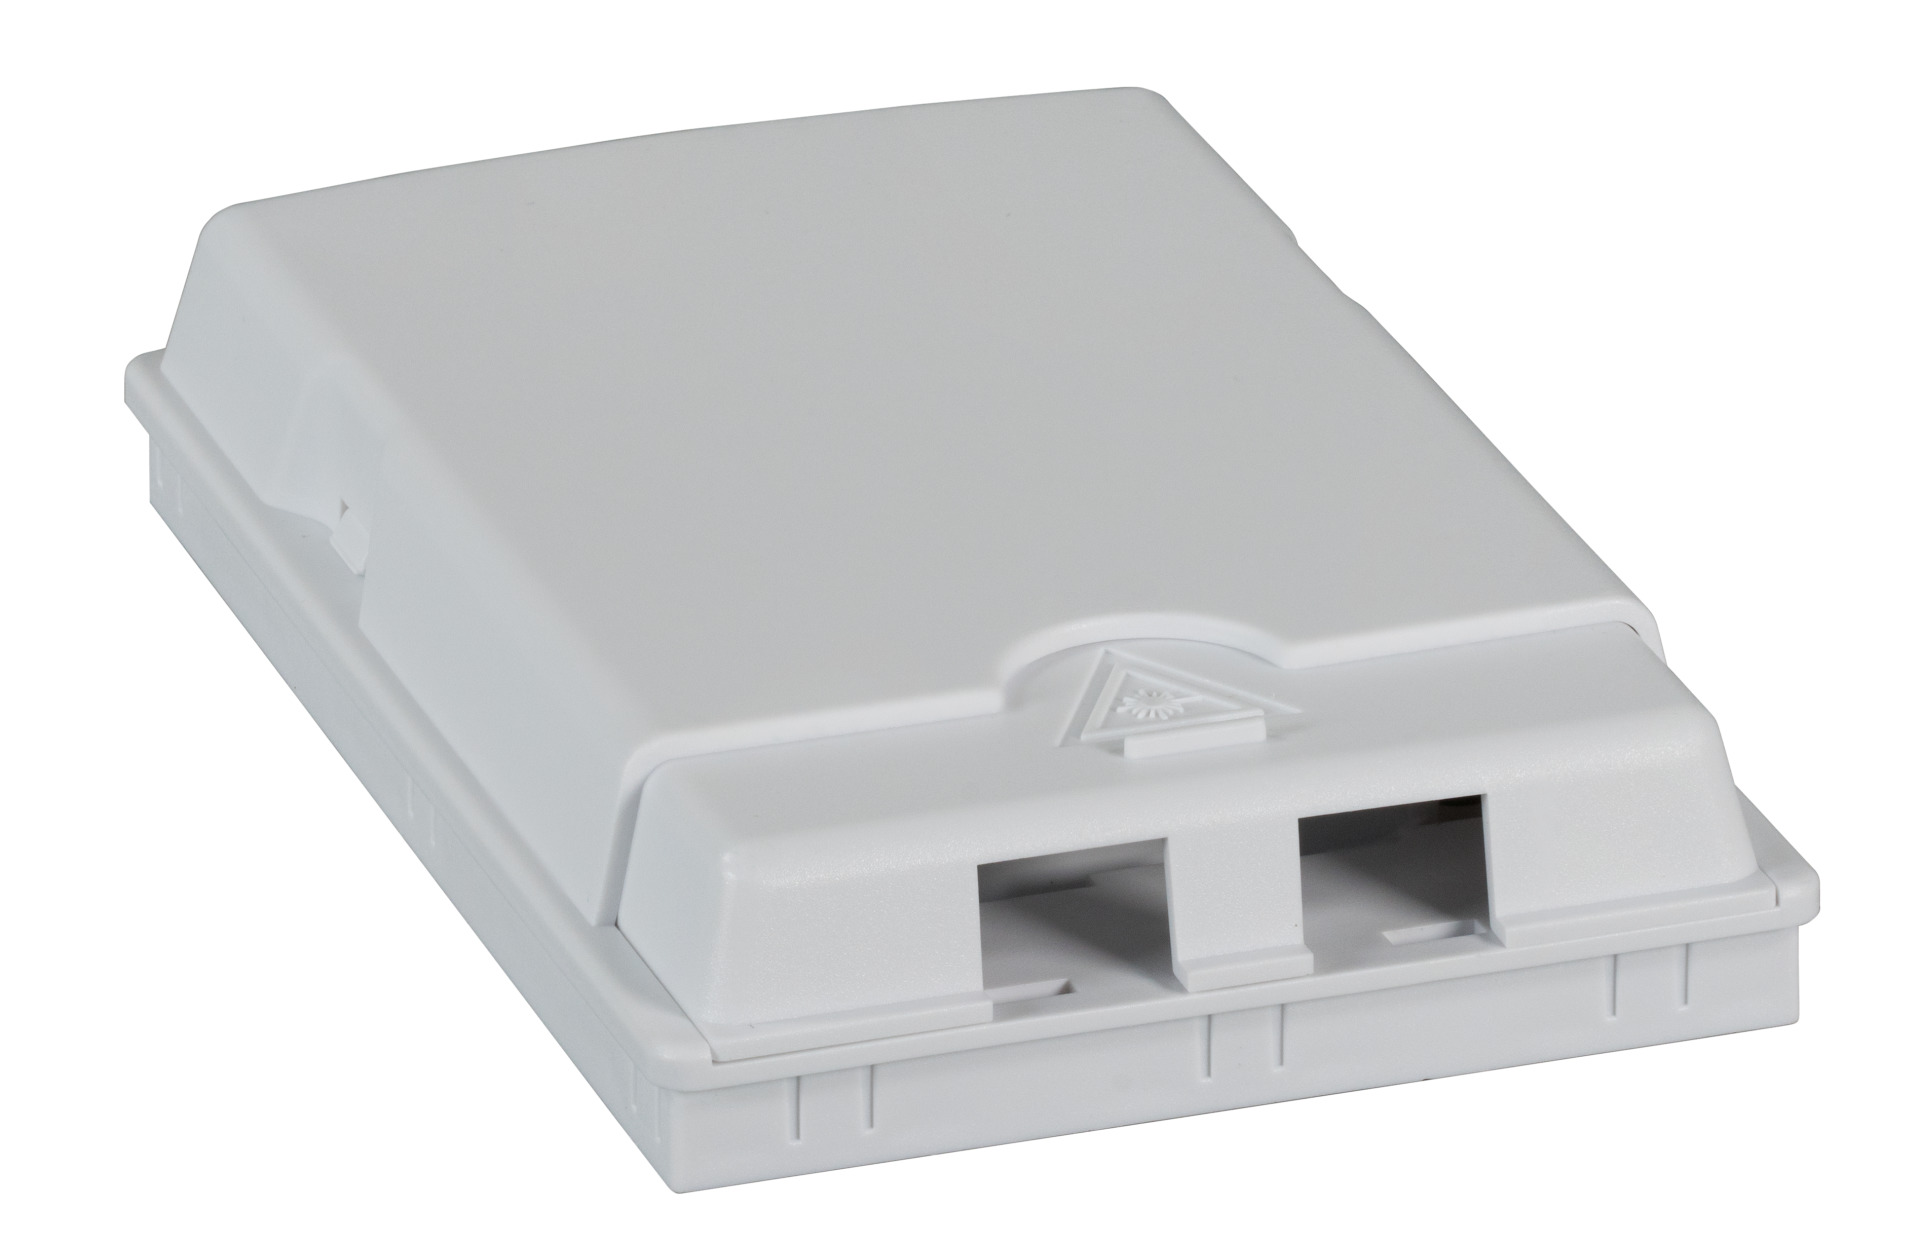 FTTH Indoor Connectionbox for 2fiber, 2adapter, connector protection